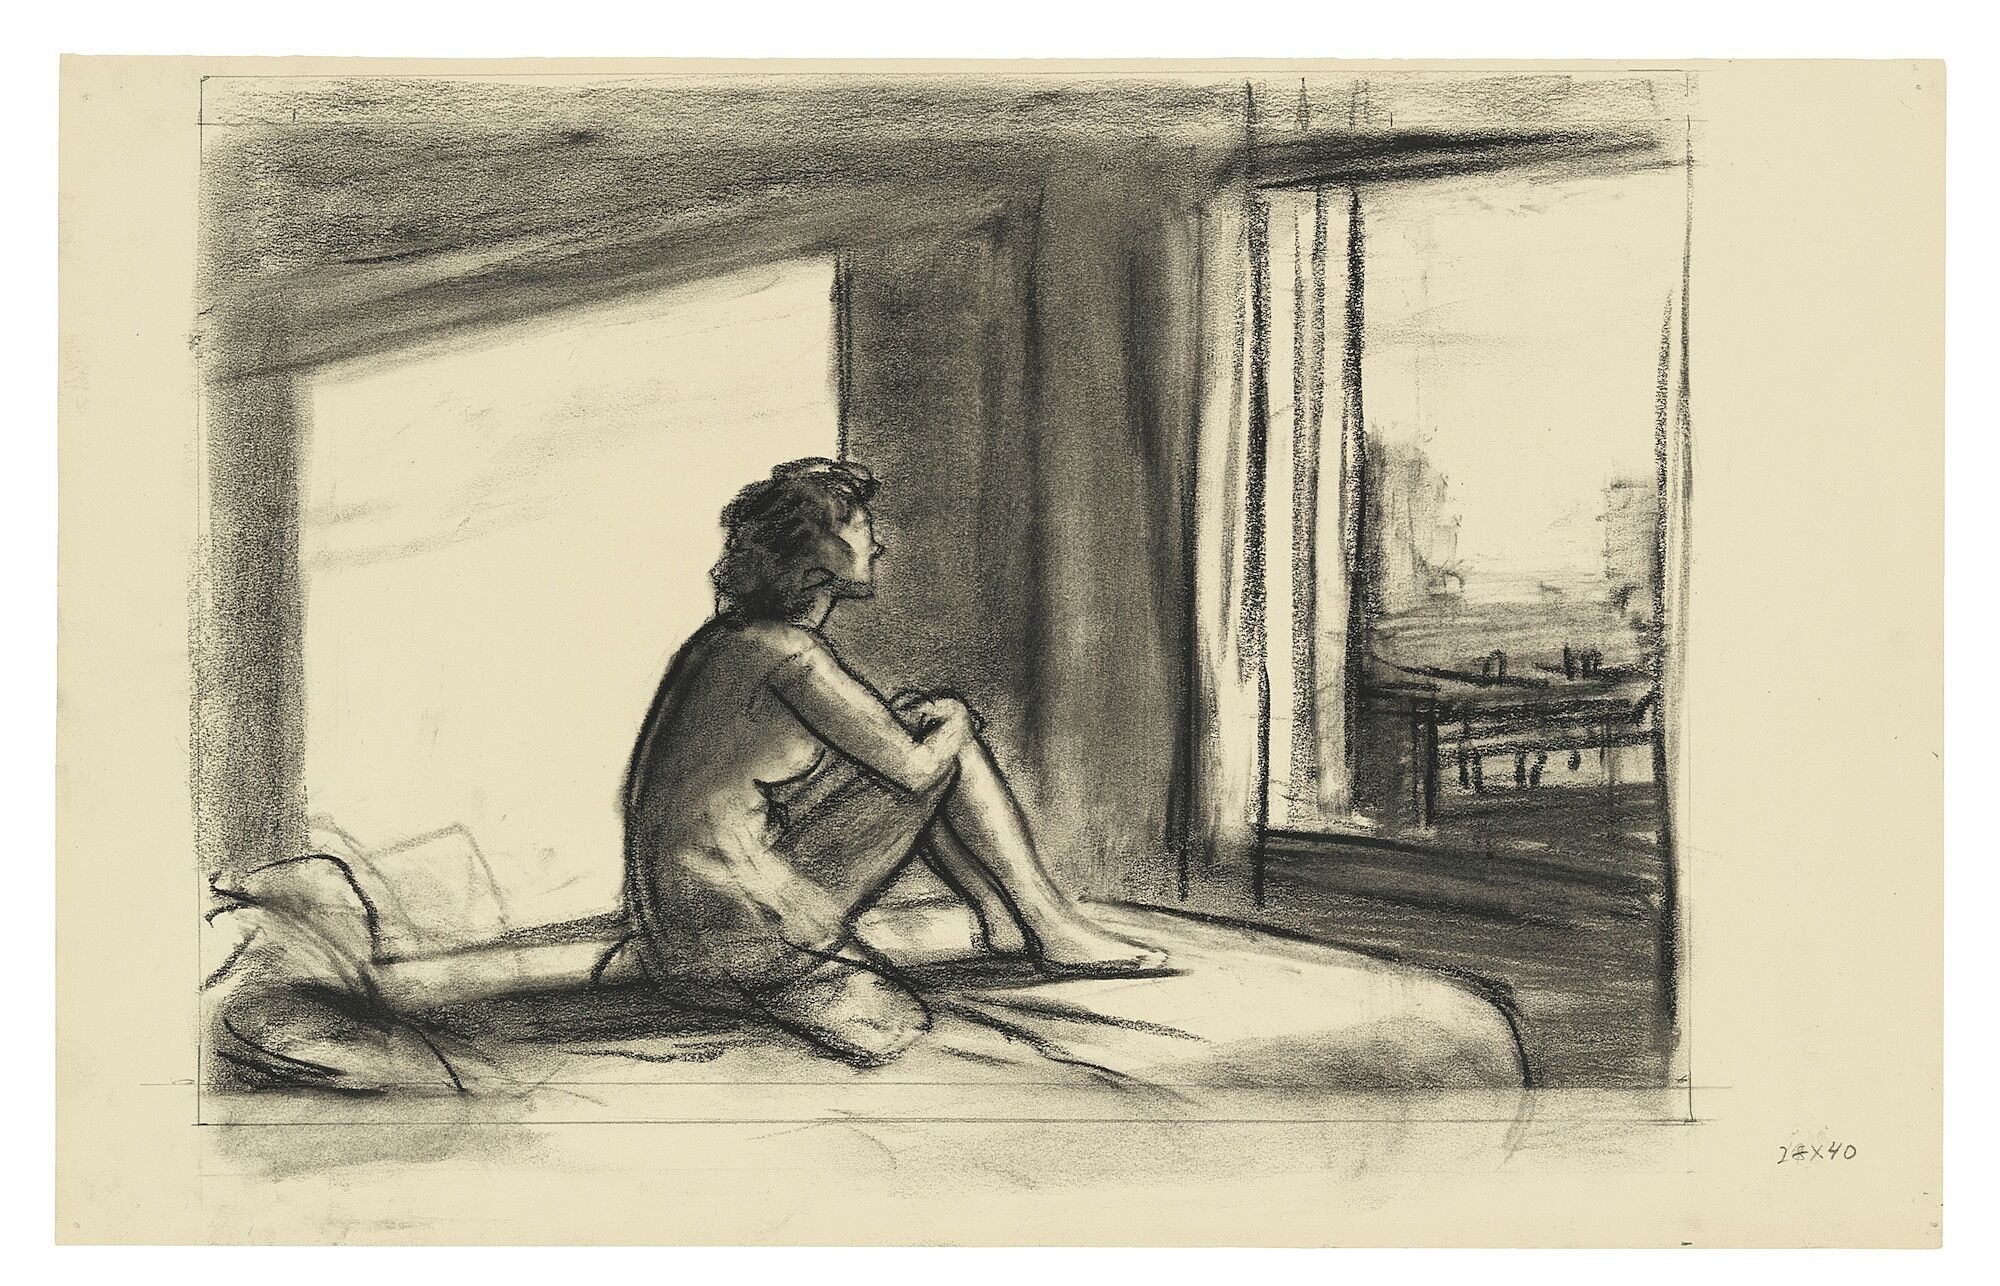 A sketch of a woman sitting on a bed looking out a window.